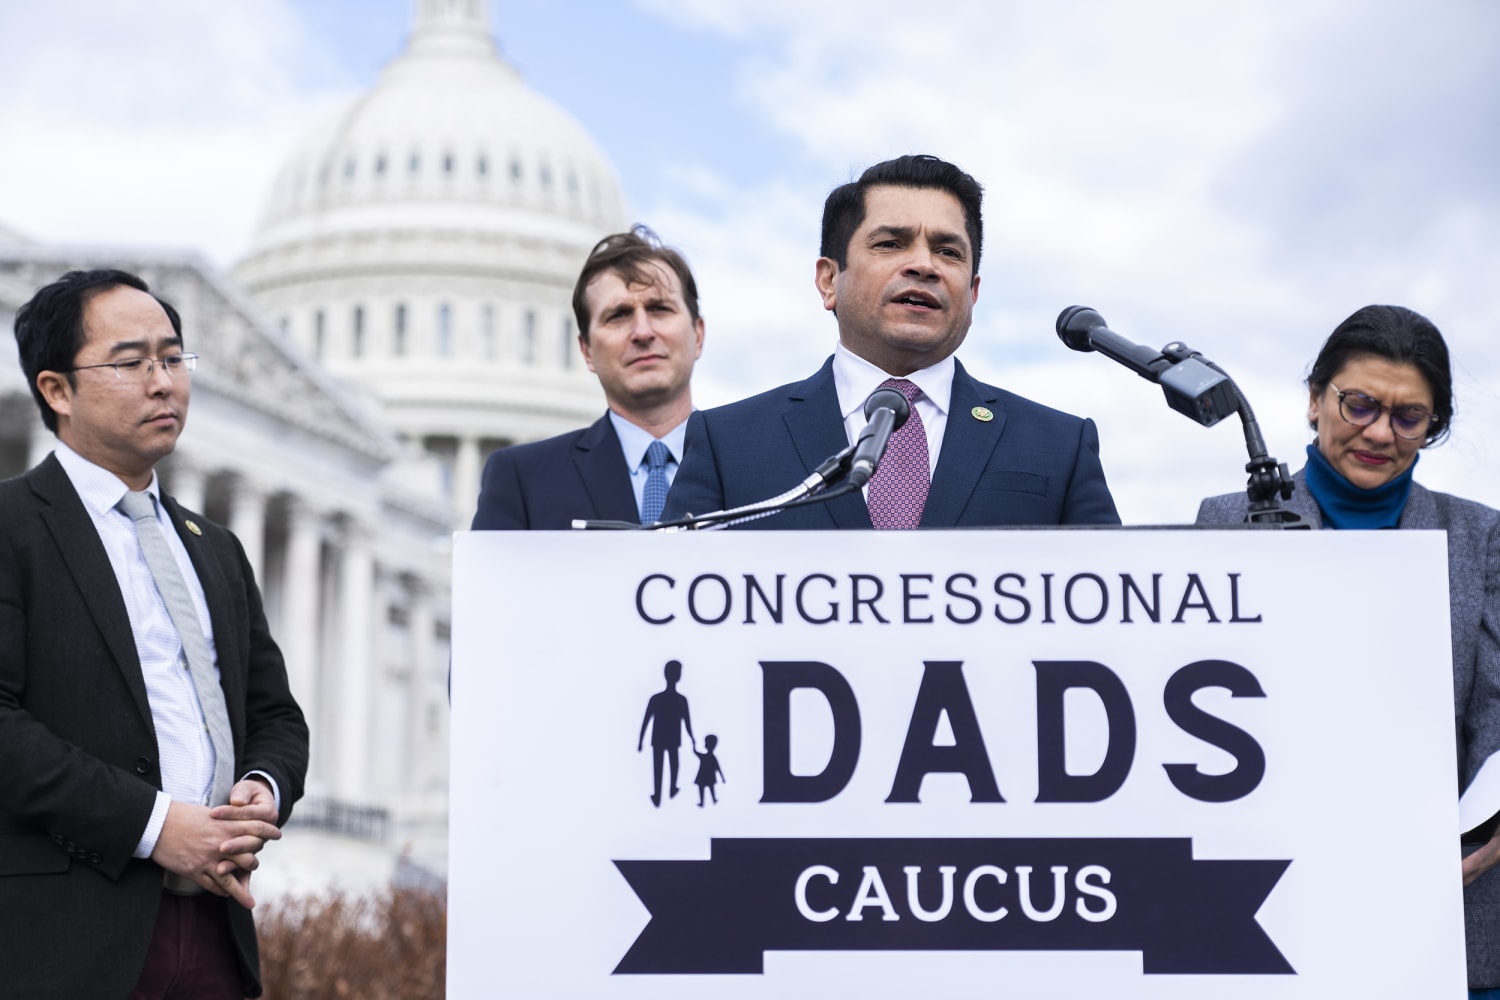 No dad jokes here: Newly launched Congressional Dads Caucus to focus on policies for working families